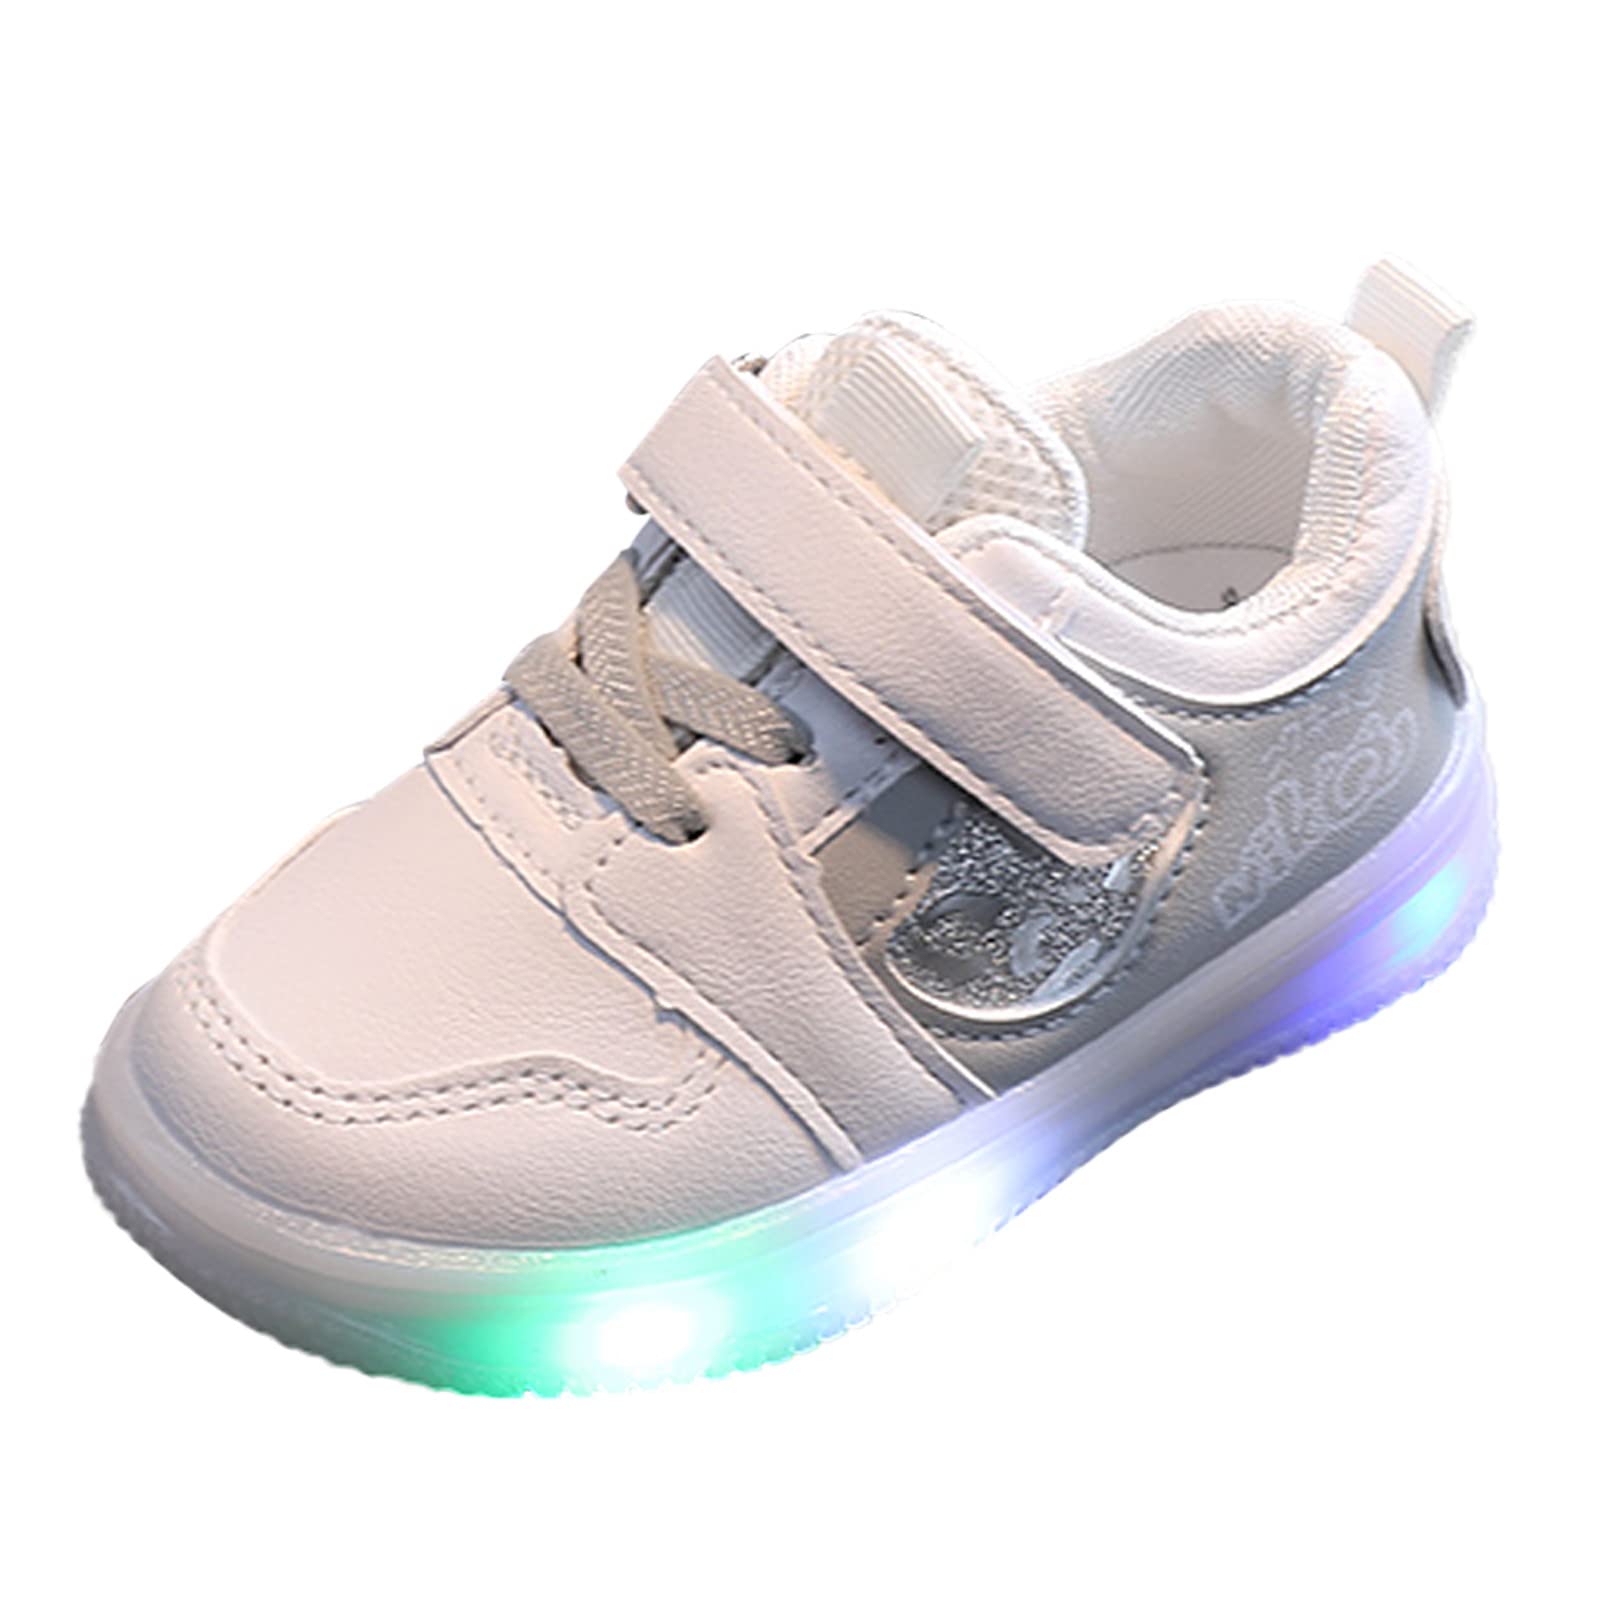 Mr.SHOES Black Shoes USB Charging LED Light 7 COLOR Up Glowing Luminous  Dancing Sneakers Dancing Shoes For Men - Buy Black Color Mr.SHOES Black  Shoes USB Charging LED Light 7 COLOR Up